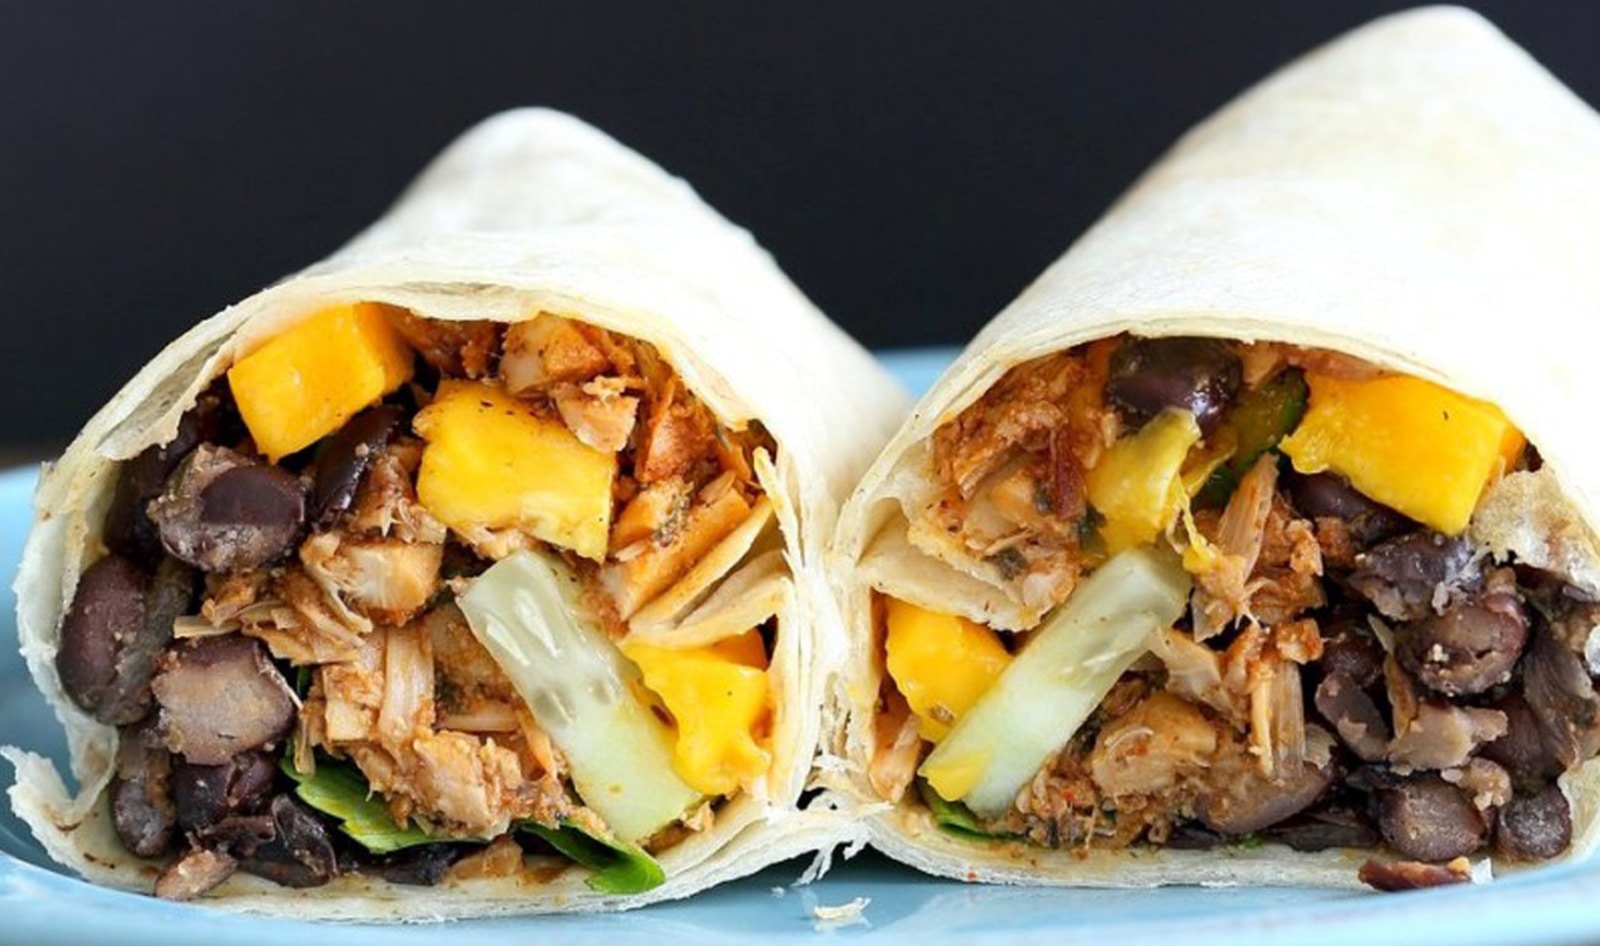 7 Quirky Vegan Burritos To Make You Rethink Your Favorite Meal